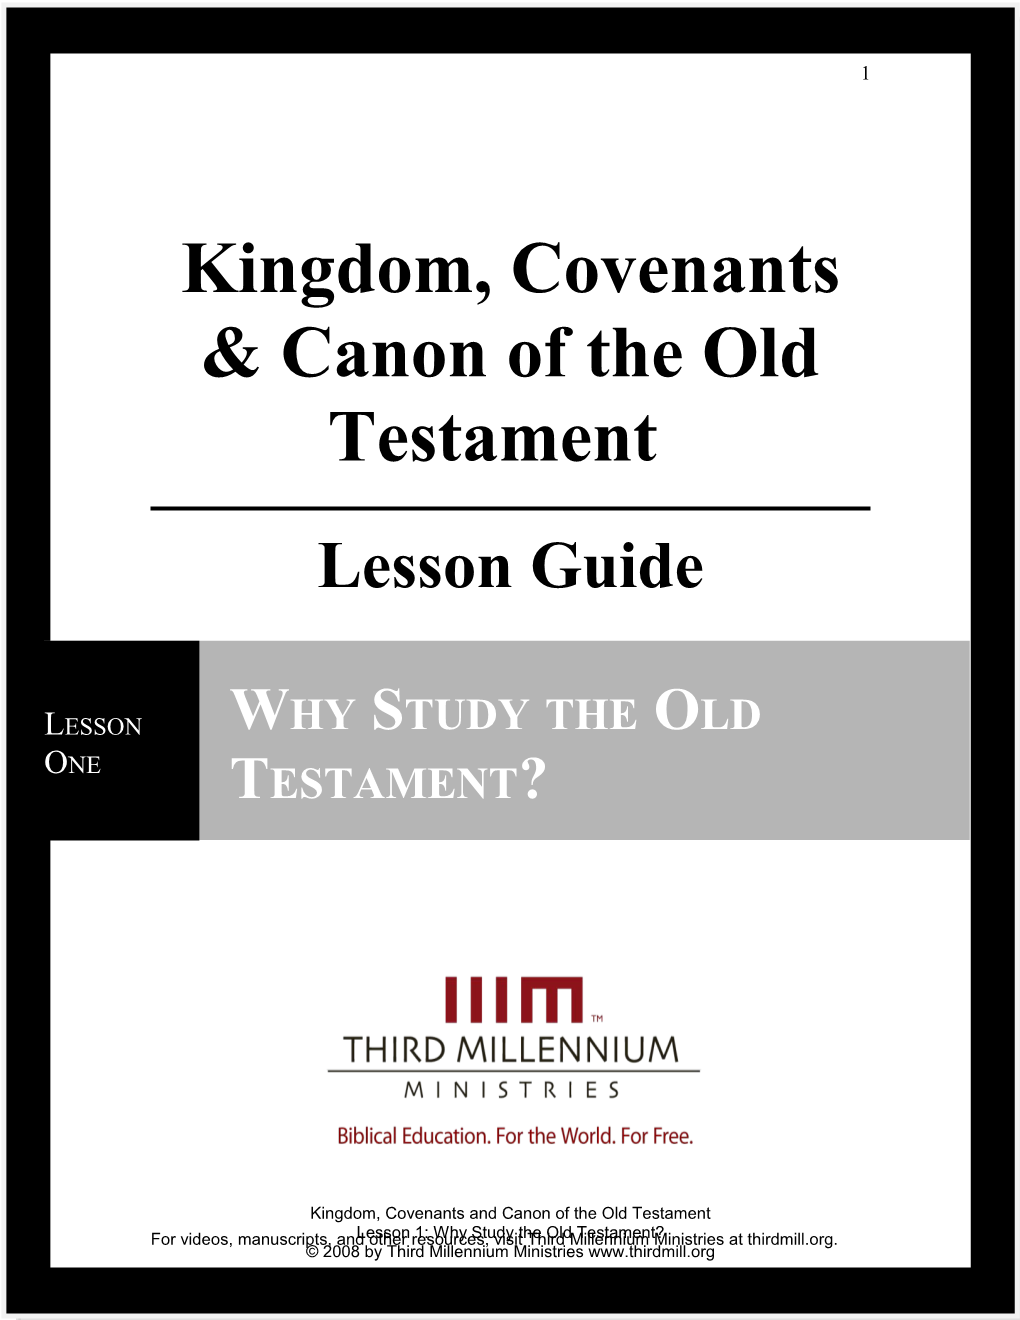 Kingdom, Covenants and Canon of the Old Testament